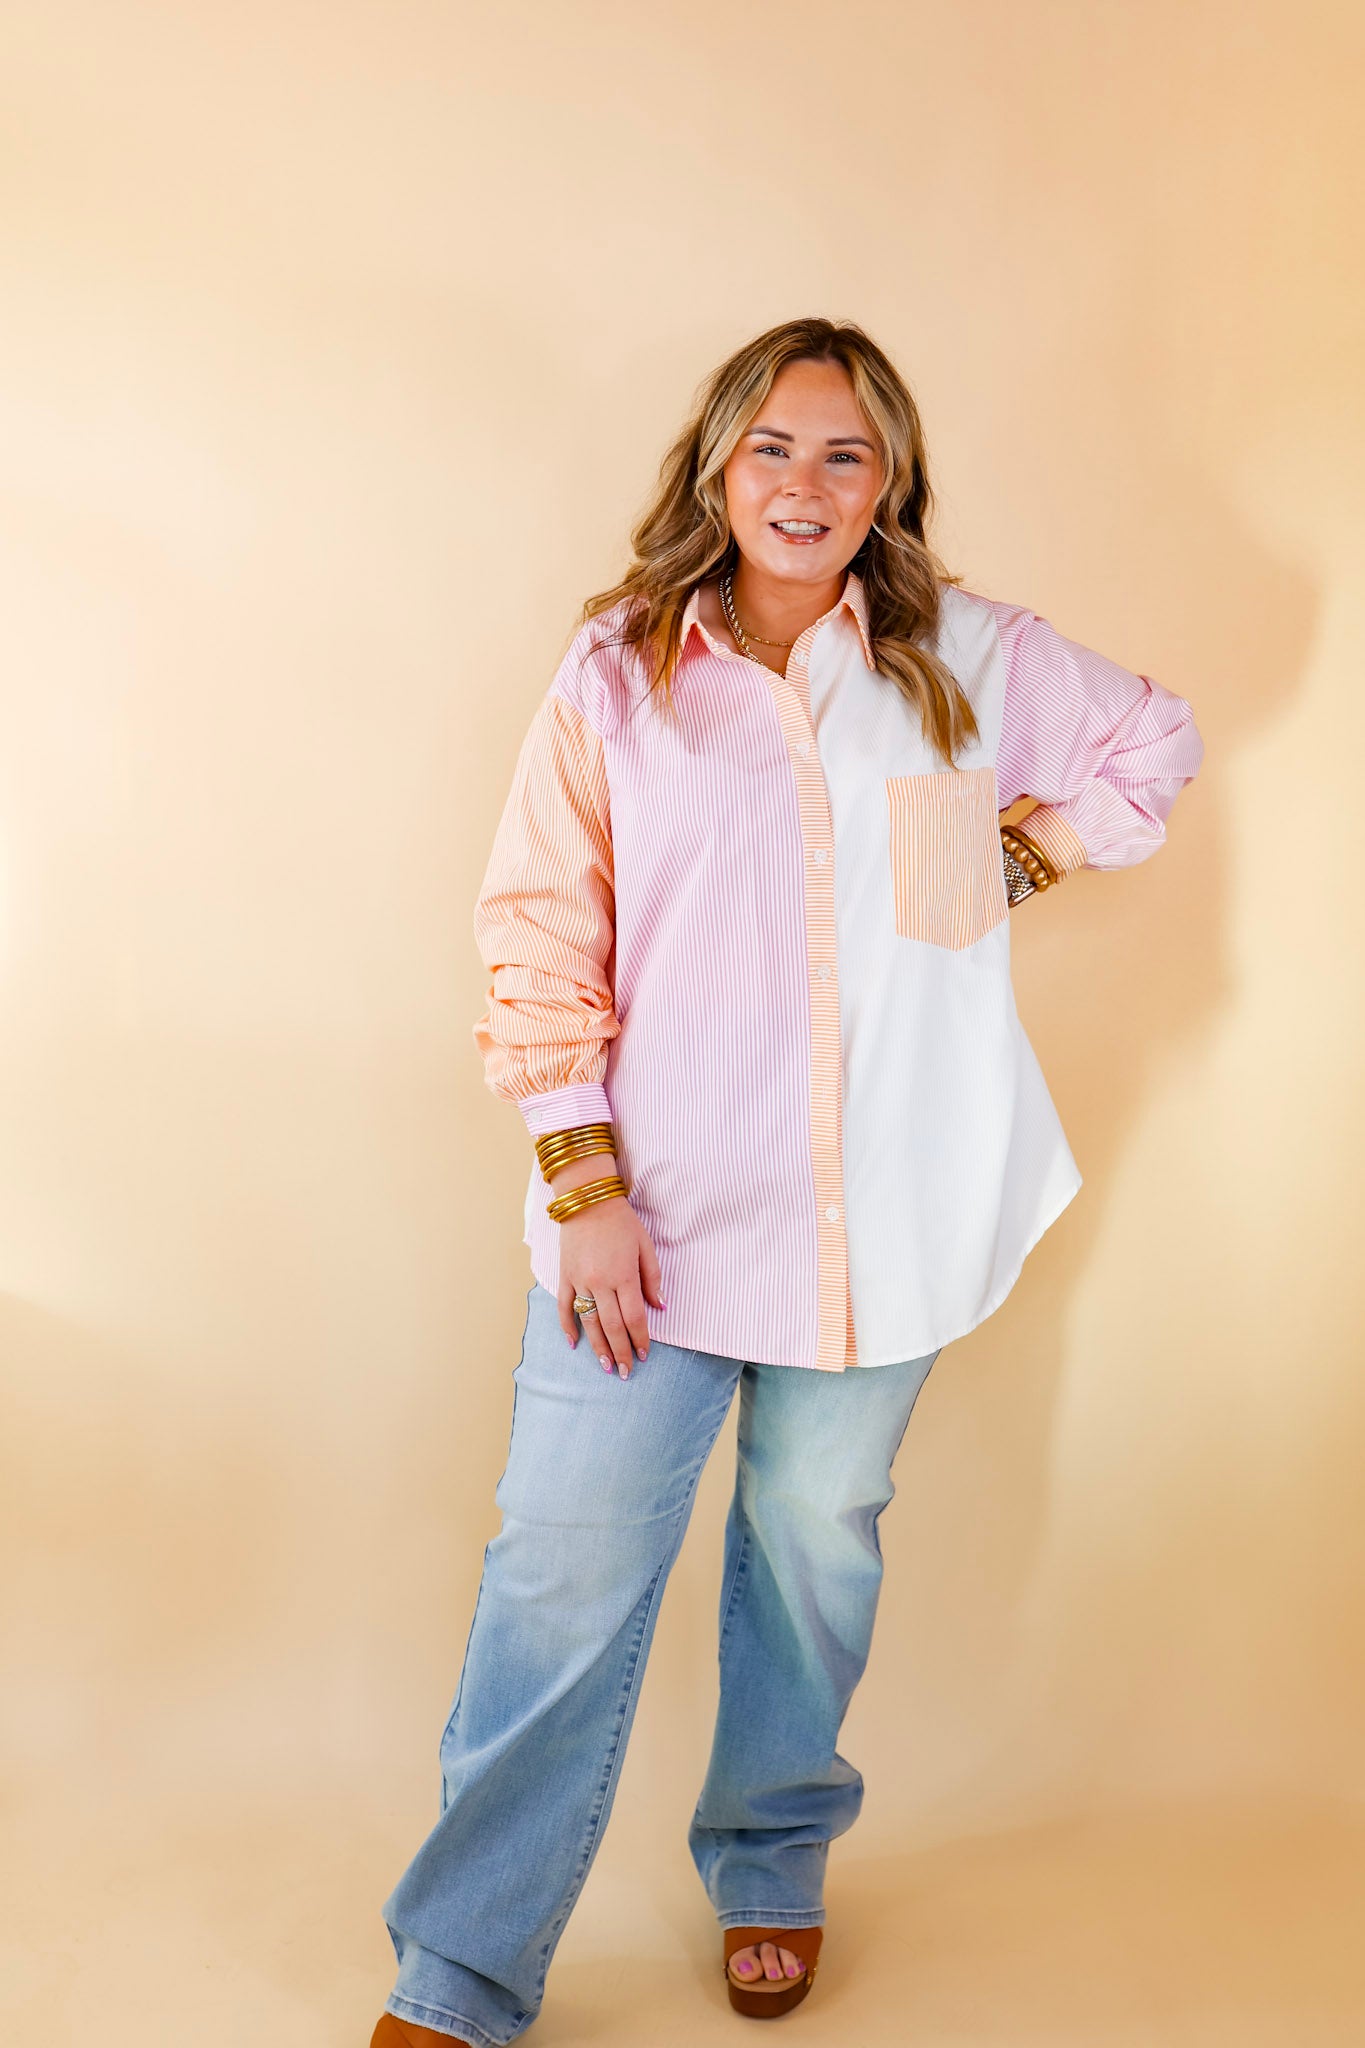 Picture This Pin Stripe Color Block Button Up Top in Pink and Orange - Giddy Up Glamour Boutique